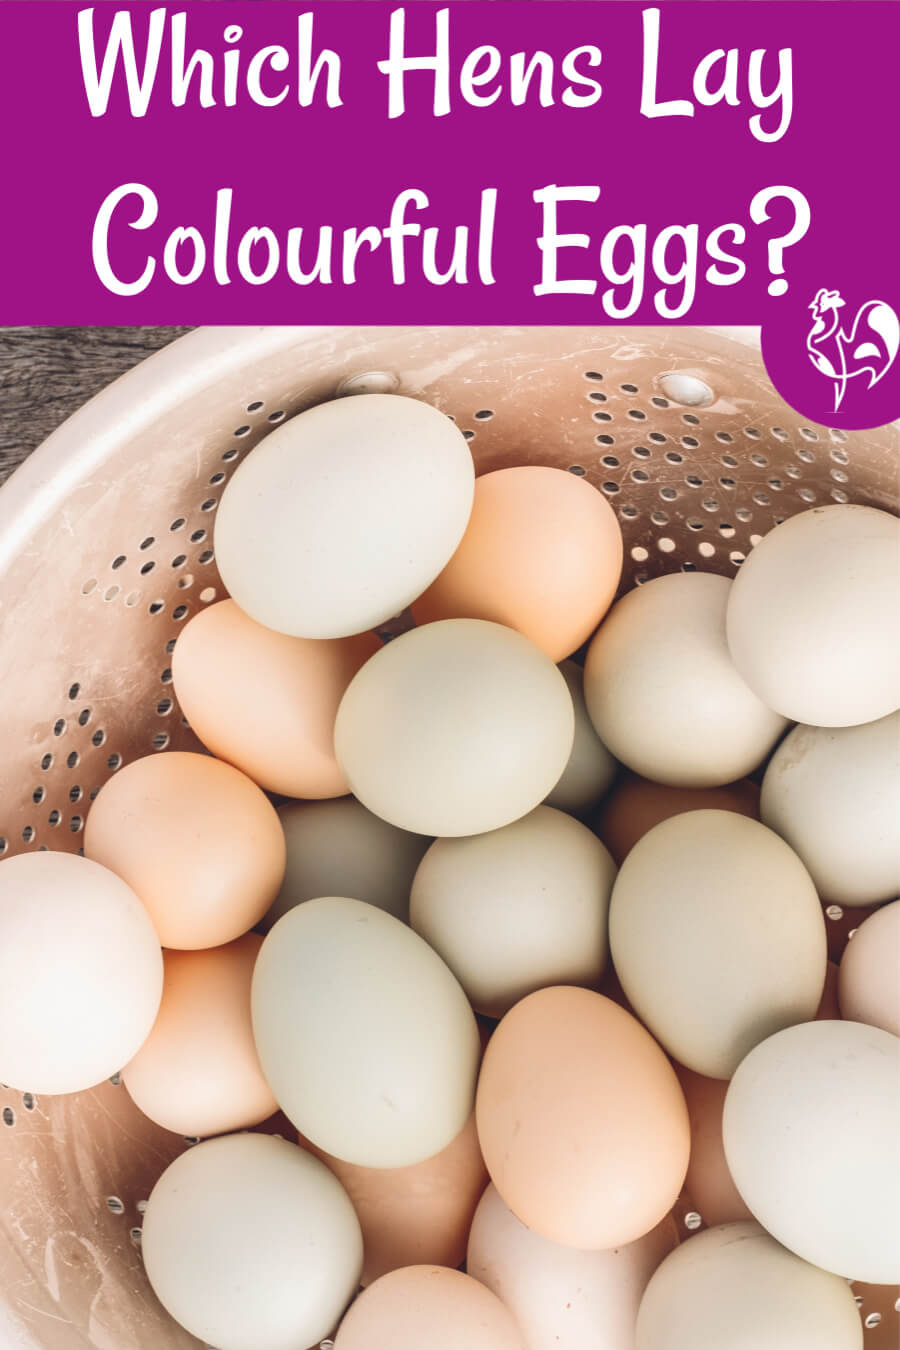 Chickens who lay colourful eggs: pin for later.